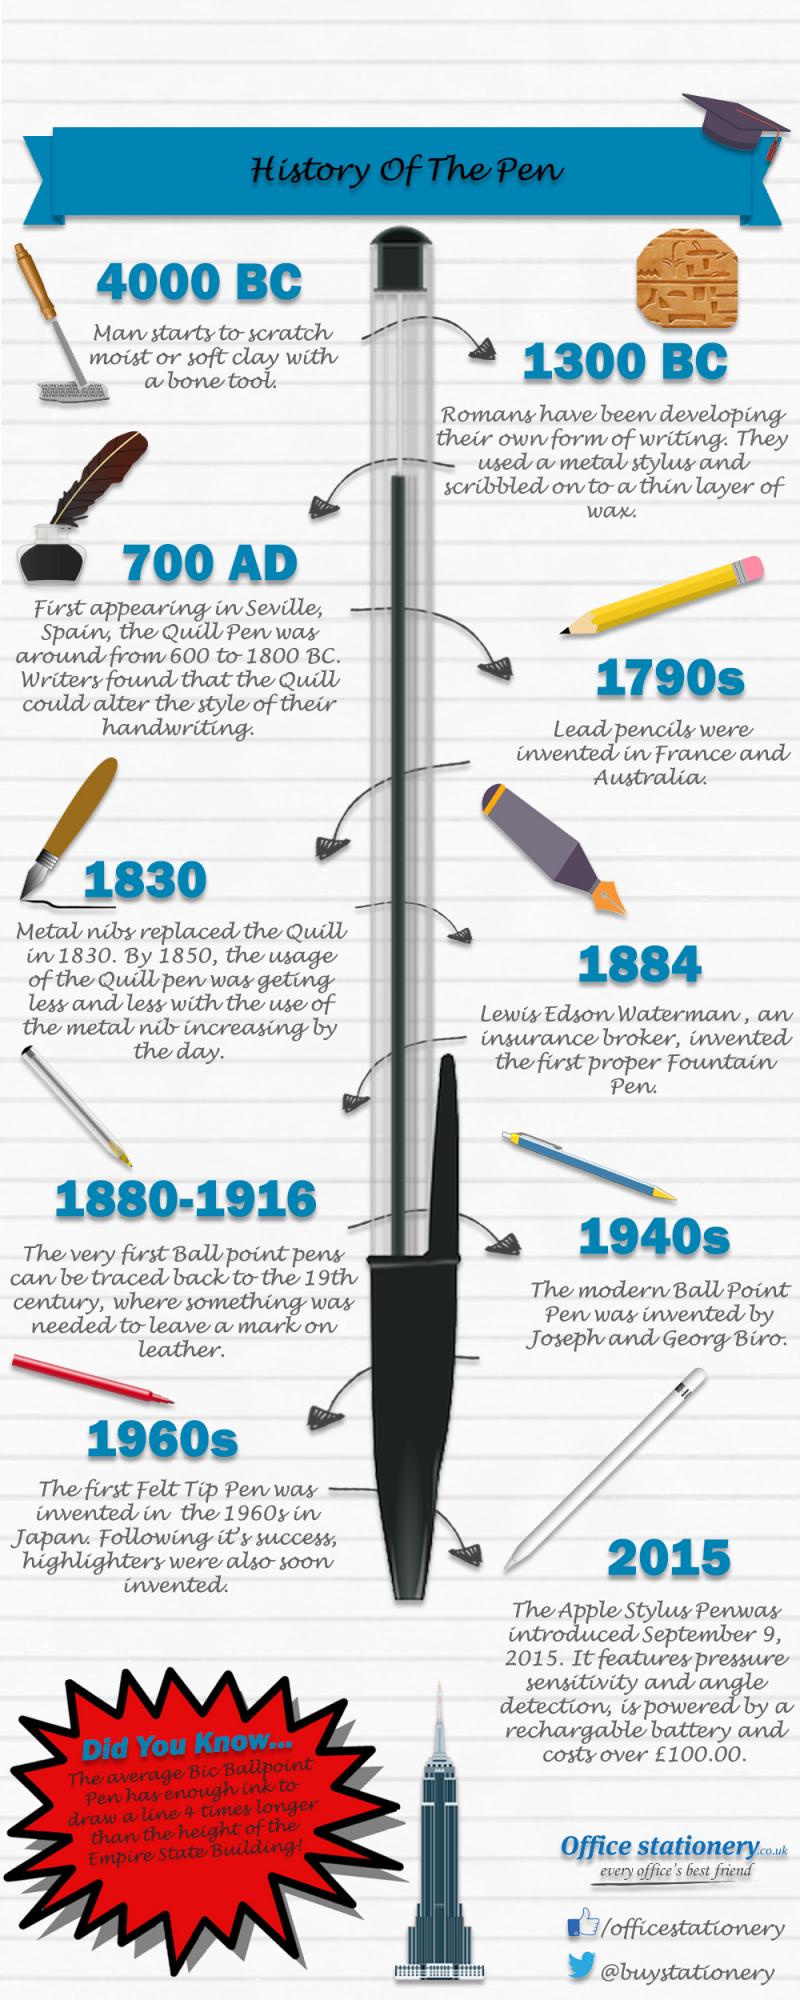 The history of the pen and how apple are shaping it